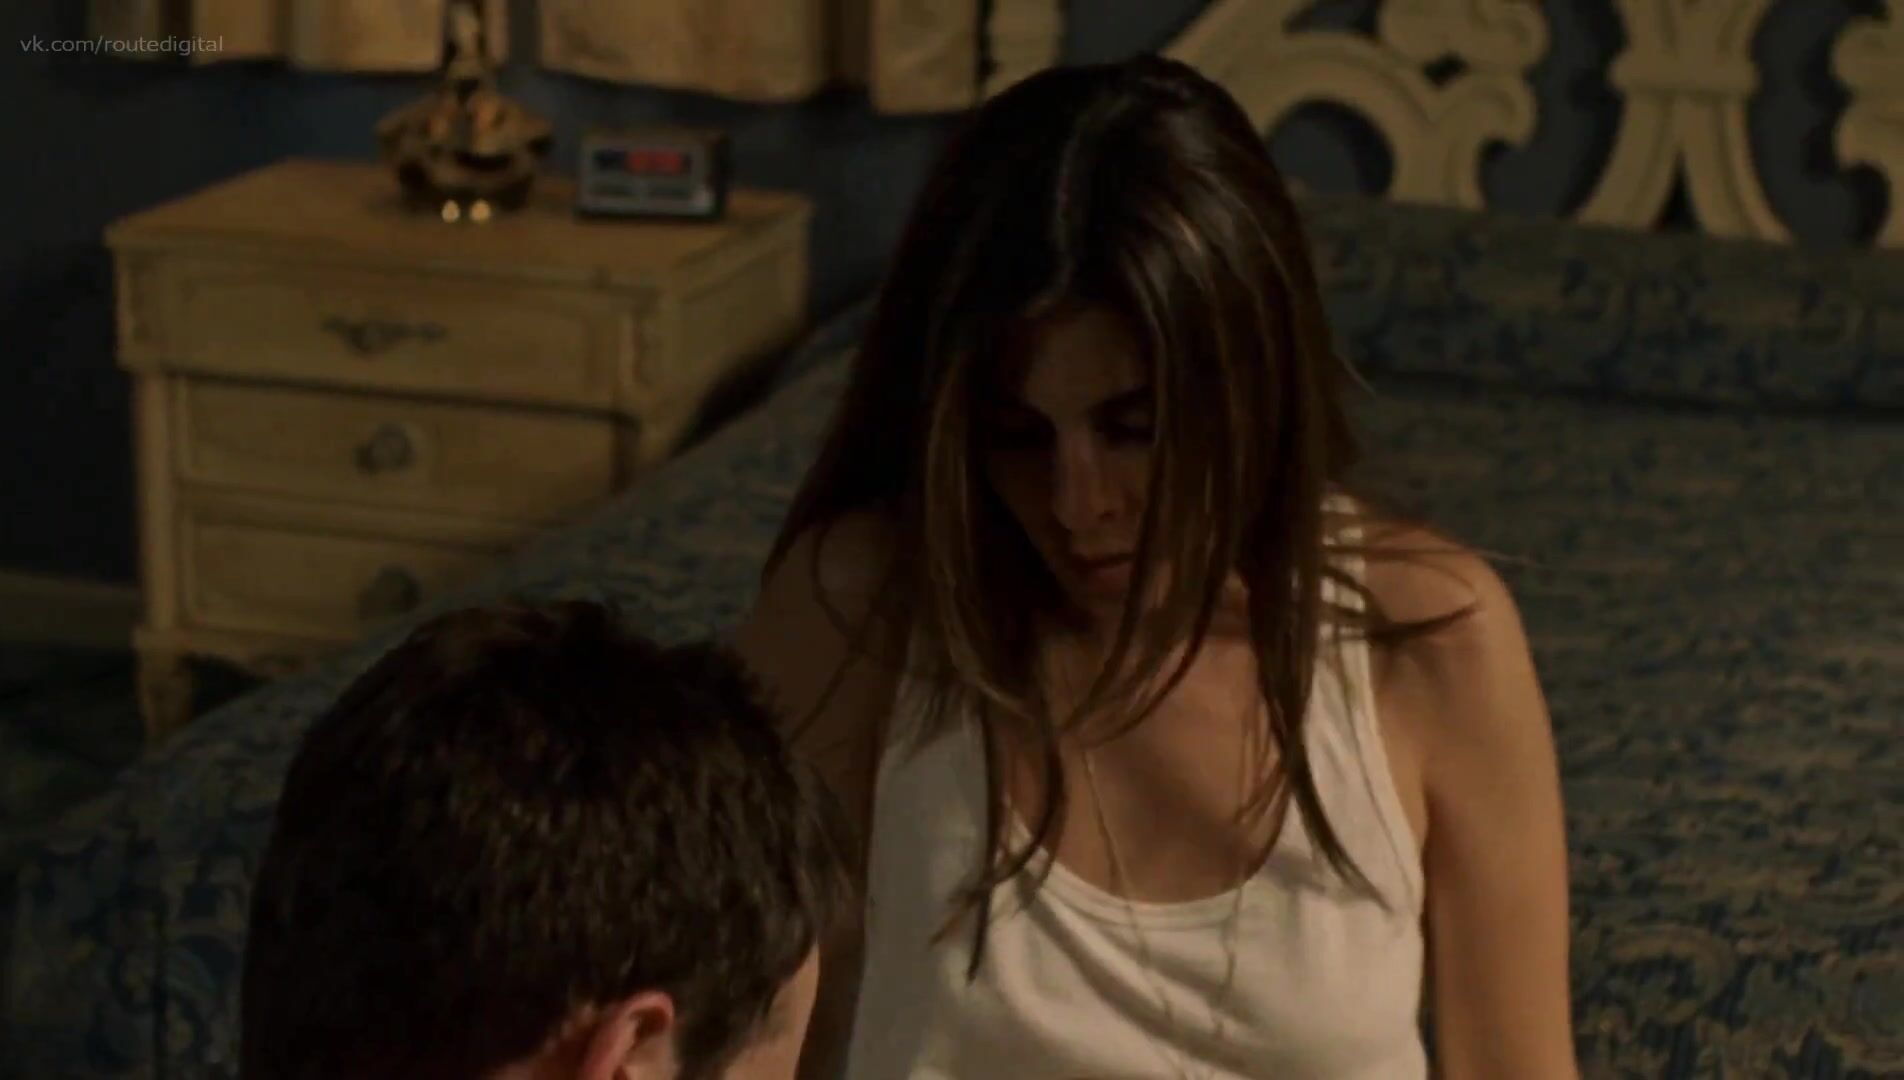 Butt Plug Jamie Lynn Sigler nude love for sex isn't a secret anymore so she fools around in movie BangBros - 1